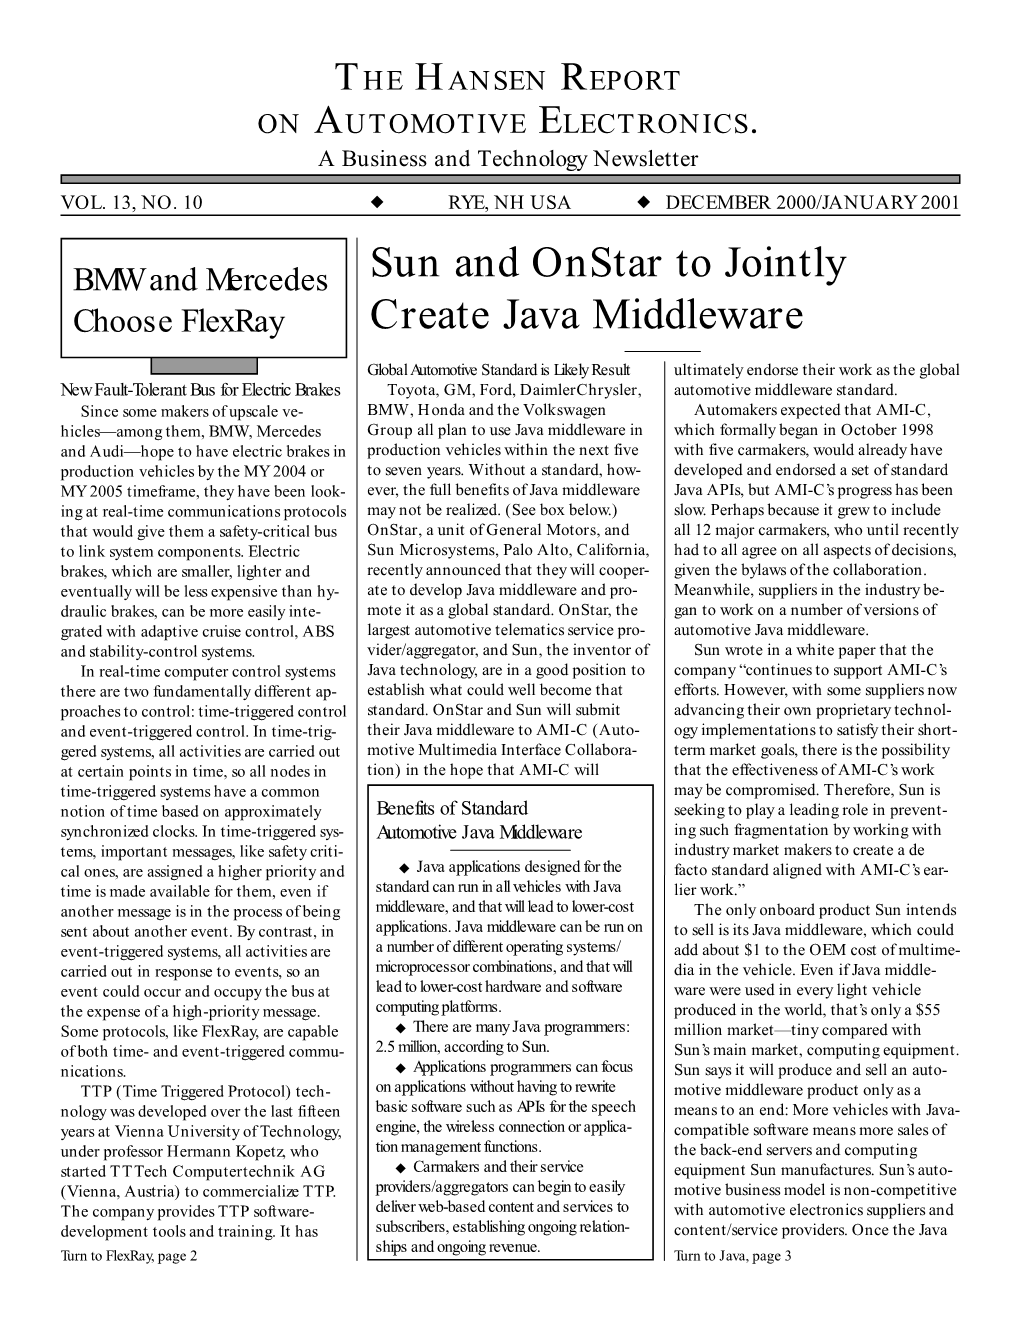 Sun and Onstar to Jointly Create Java Middleware